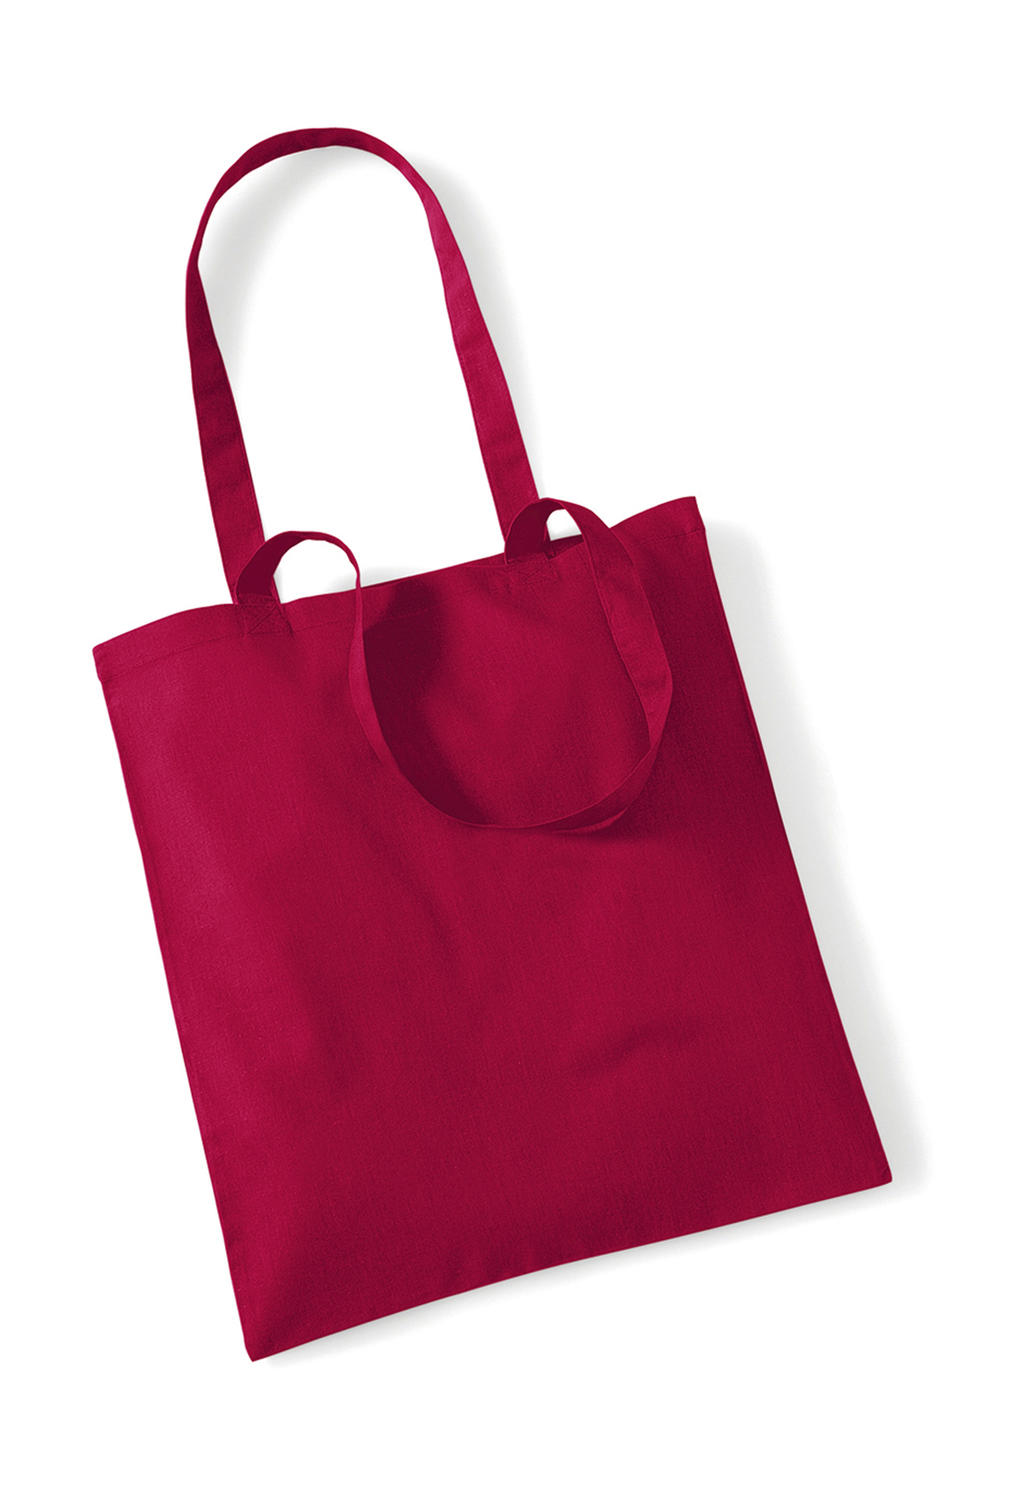  Bag for Life - Long Handles in Farbe Cranberry